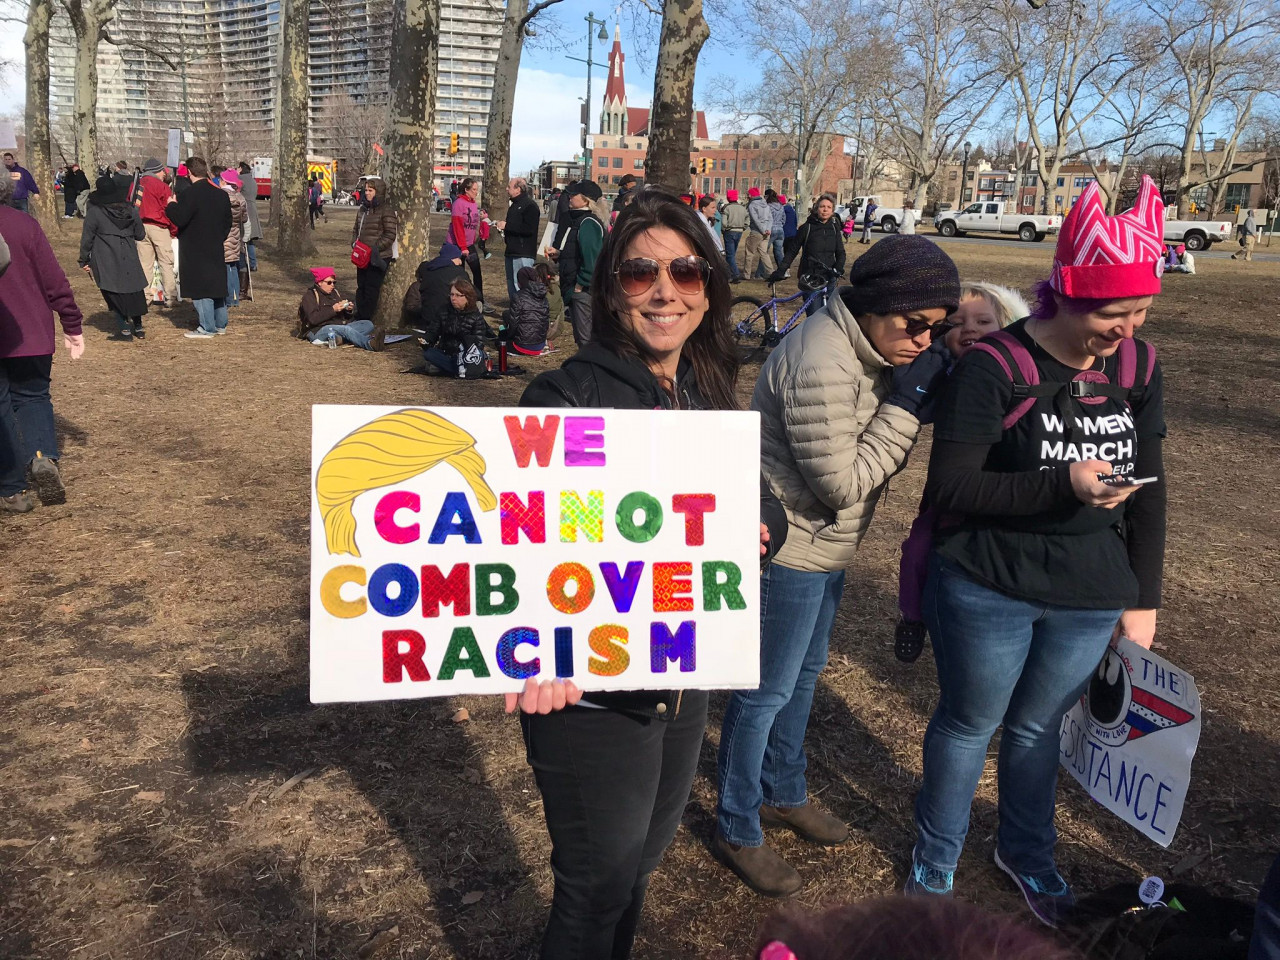 Philly Women's March 2018 - We cannot comb over <a class="bx-tag" rel="tag" href="https://wethepeople.care/page/view-channel-profile?id=129"><s>#</s><b>racism</b></a>